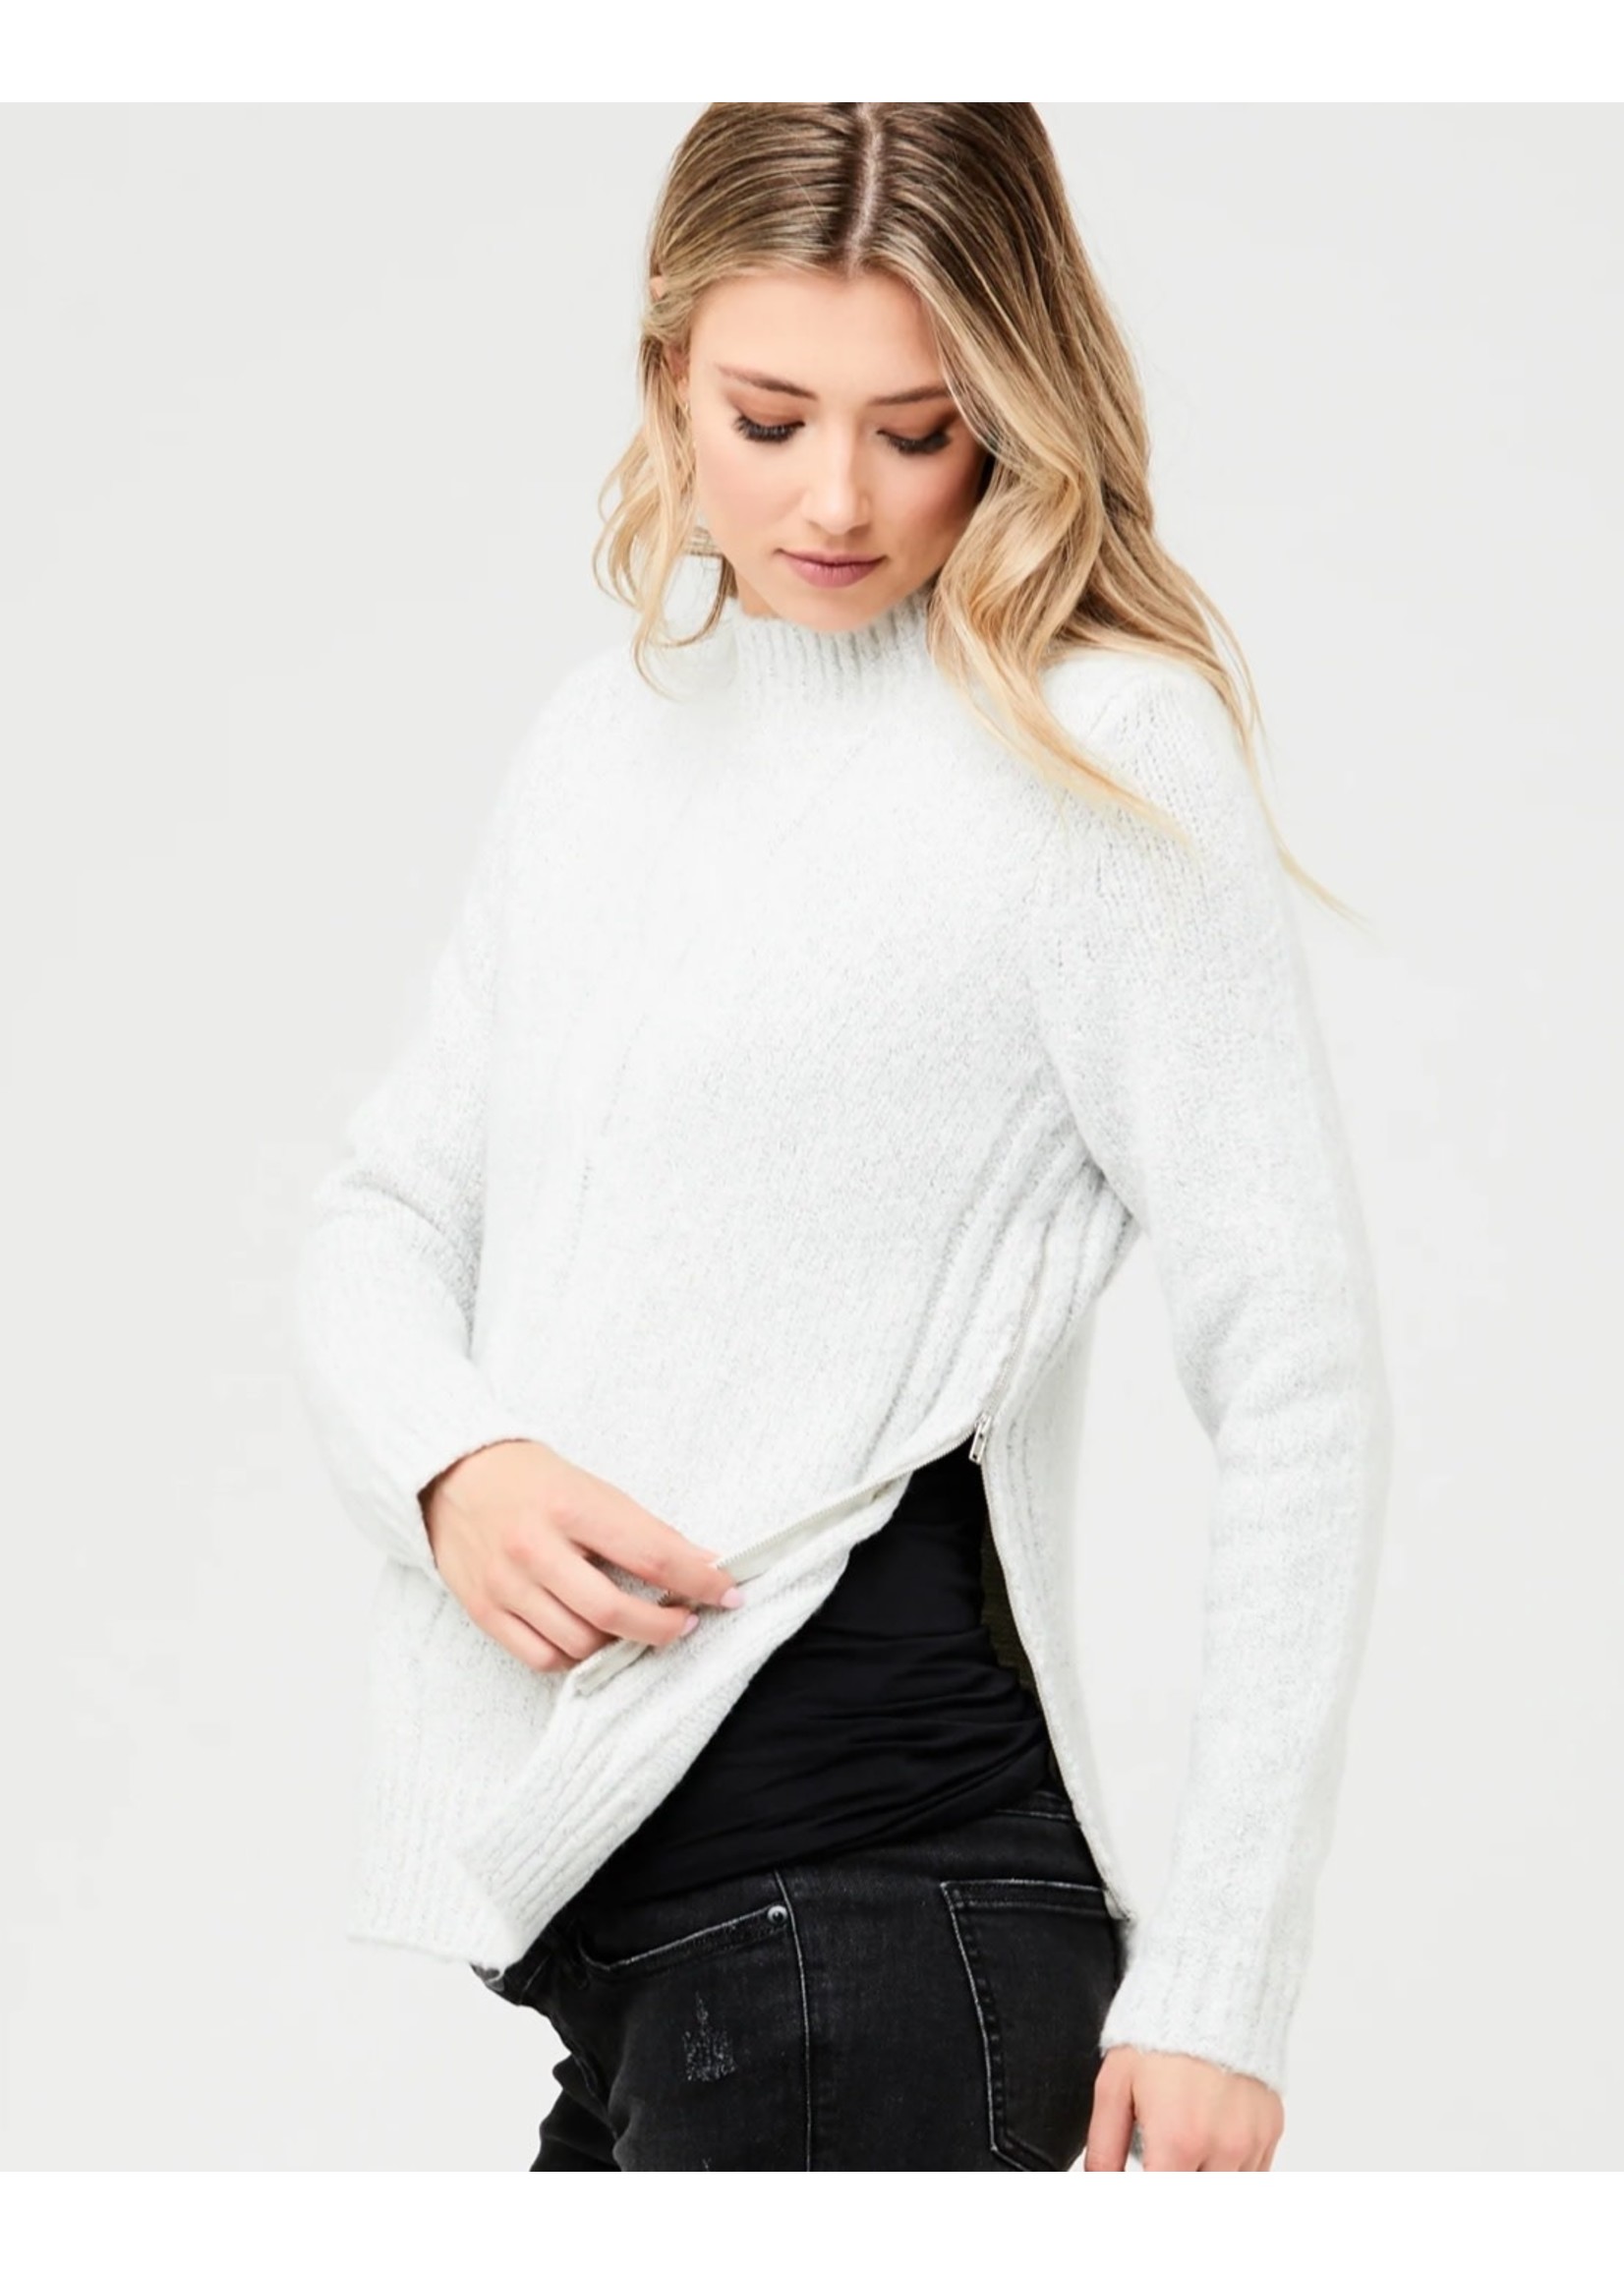 Ripe Maternity Ripe Maternity, Cable Knit Nursing & Maternity Sweater in Snow